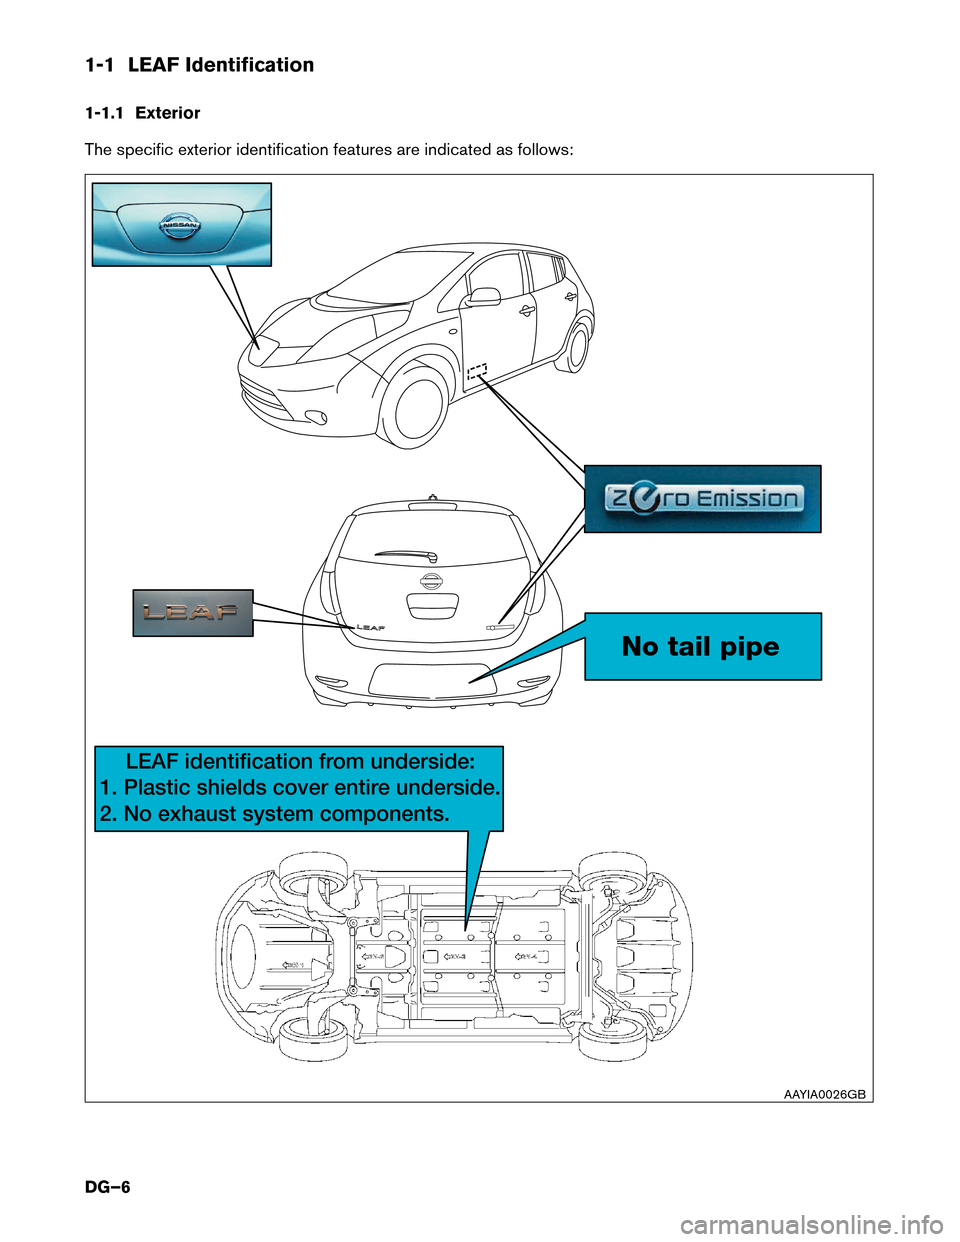 NISSAN LEAF 2016 1.G Dismantling Guide 1-1 LEAF Identification
1-1.1
Exterior
The specific exterior identification features are indicated as follows: No tail pipe
LEAF identification from underside:
1. Plastic shields cover entir
 e under